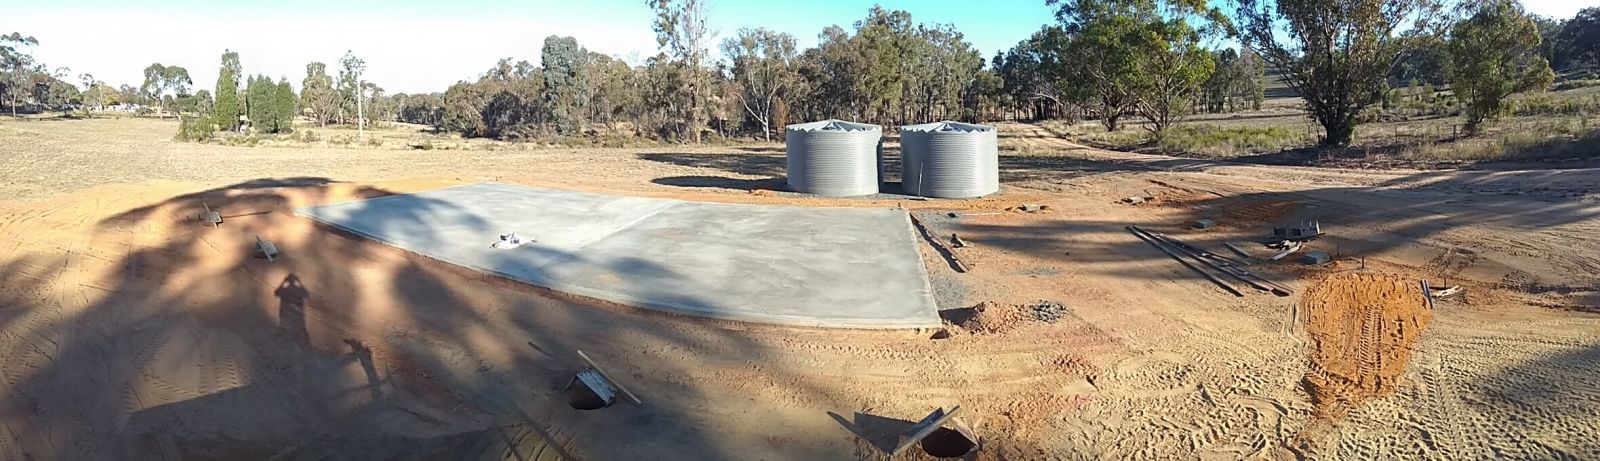 Main shed slab with new tanks...apron slab in the foreground still to be formed